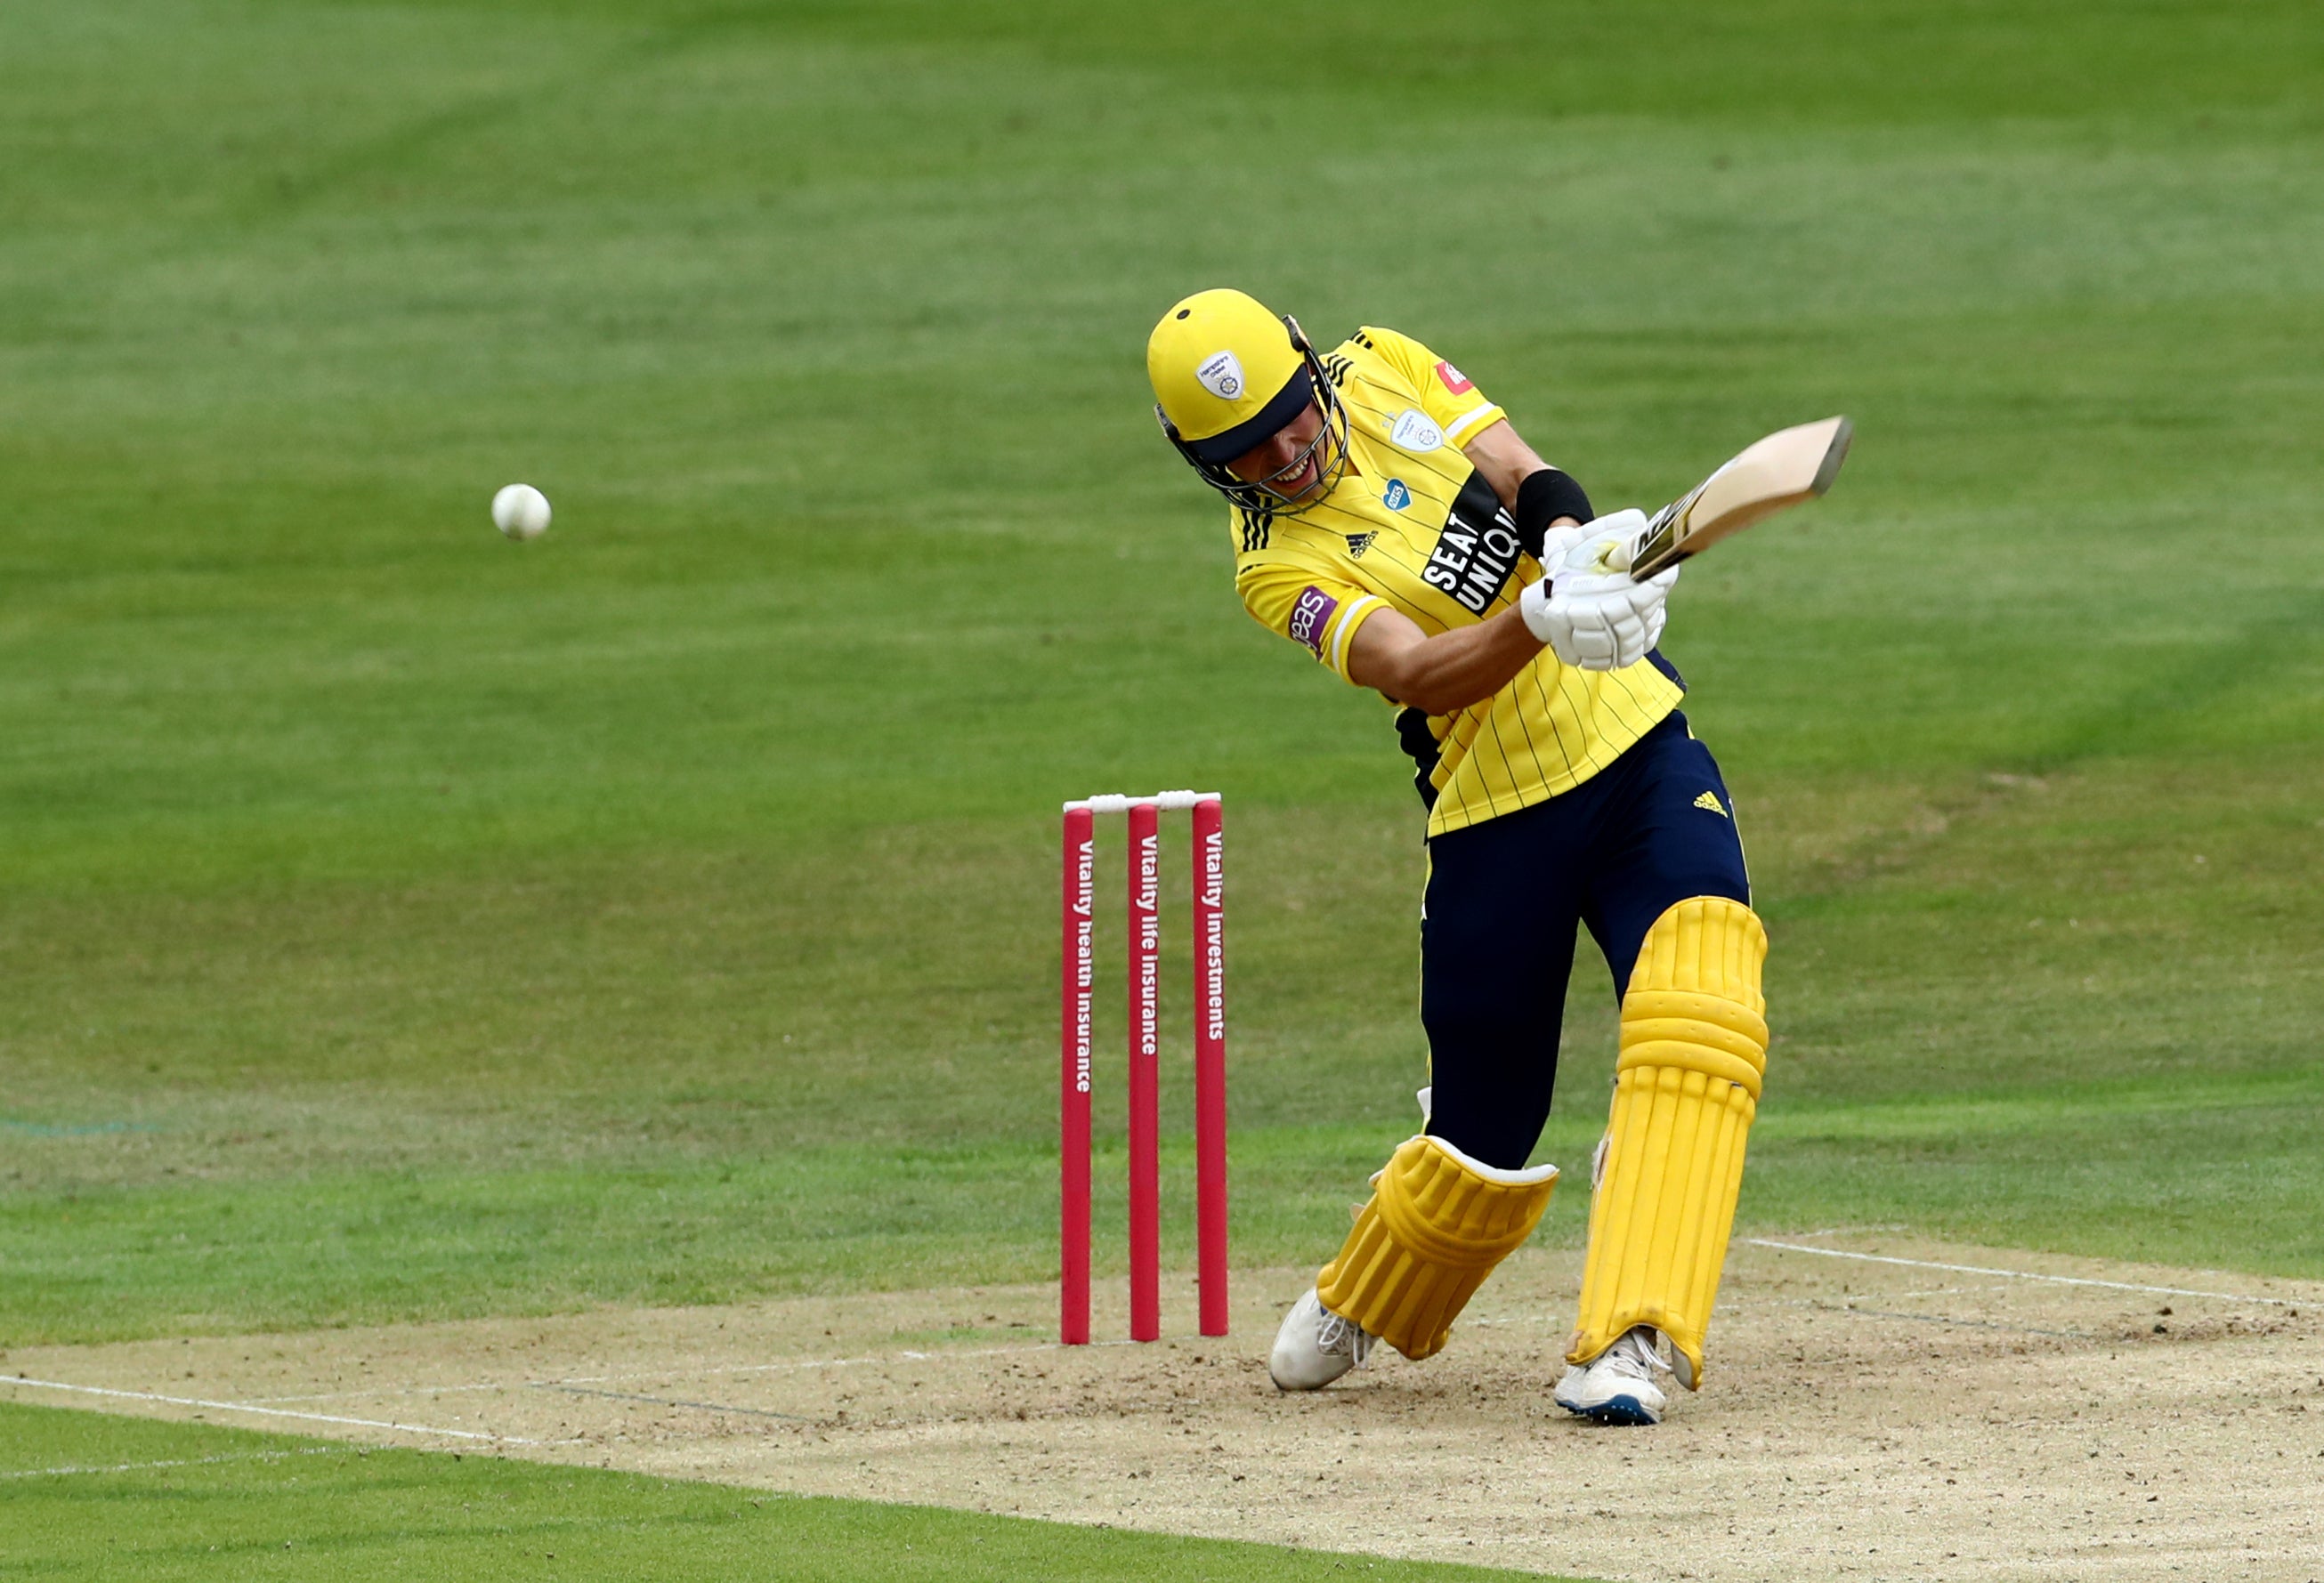 Joe Weatherley struck 43 from 13 balls as Hampshire stormed to victory over Glamorgan in the Vitality Blast